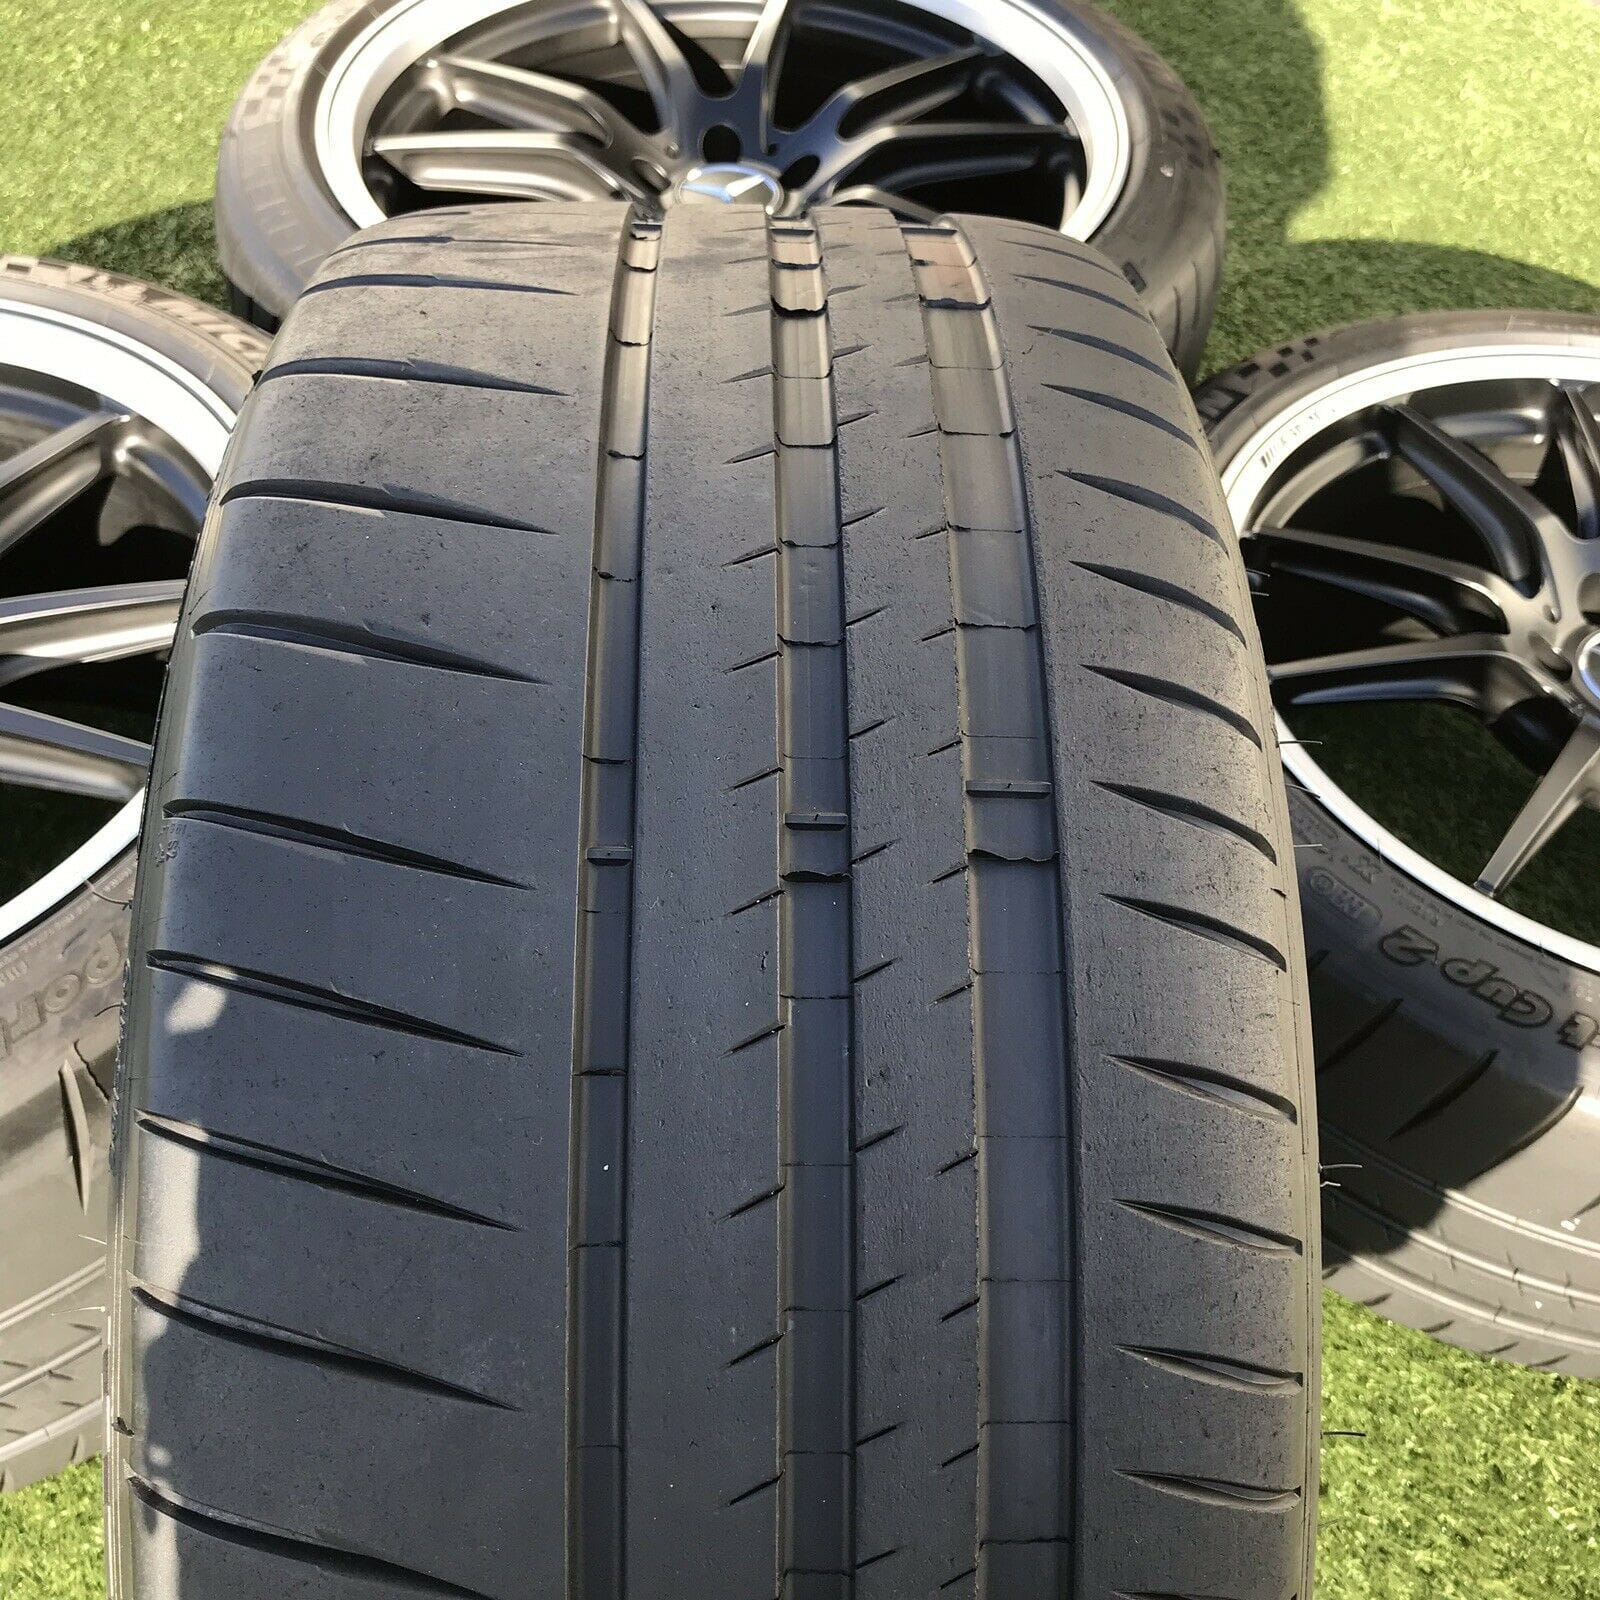 Wheels and Tires/Axles - 19" 20" Mercedes AMG OEM Wheels & Tires (Willing to remove tires) - Used - Corona, CA 92882, United States